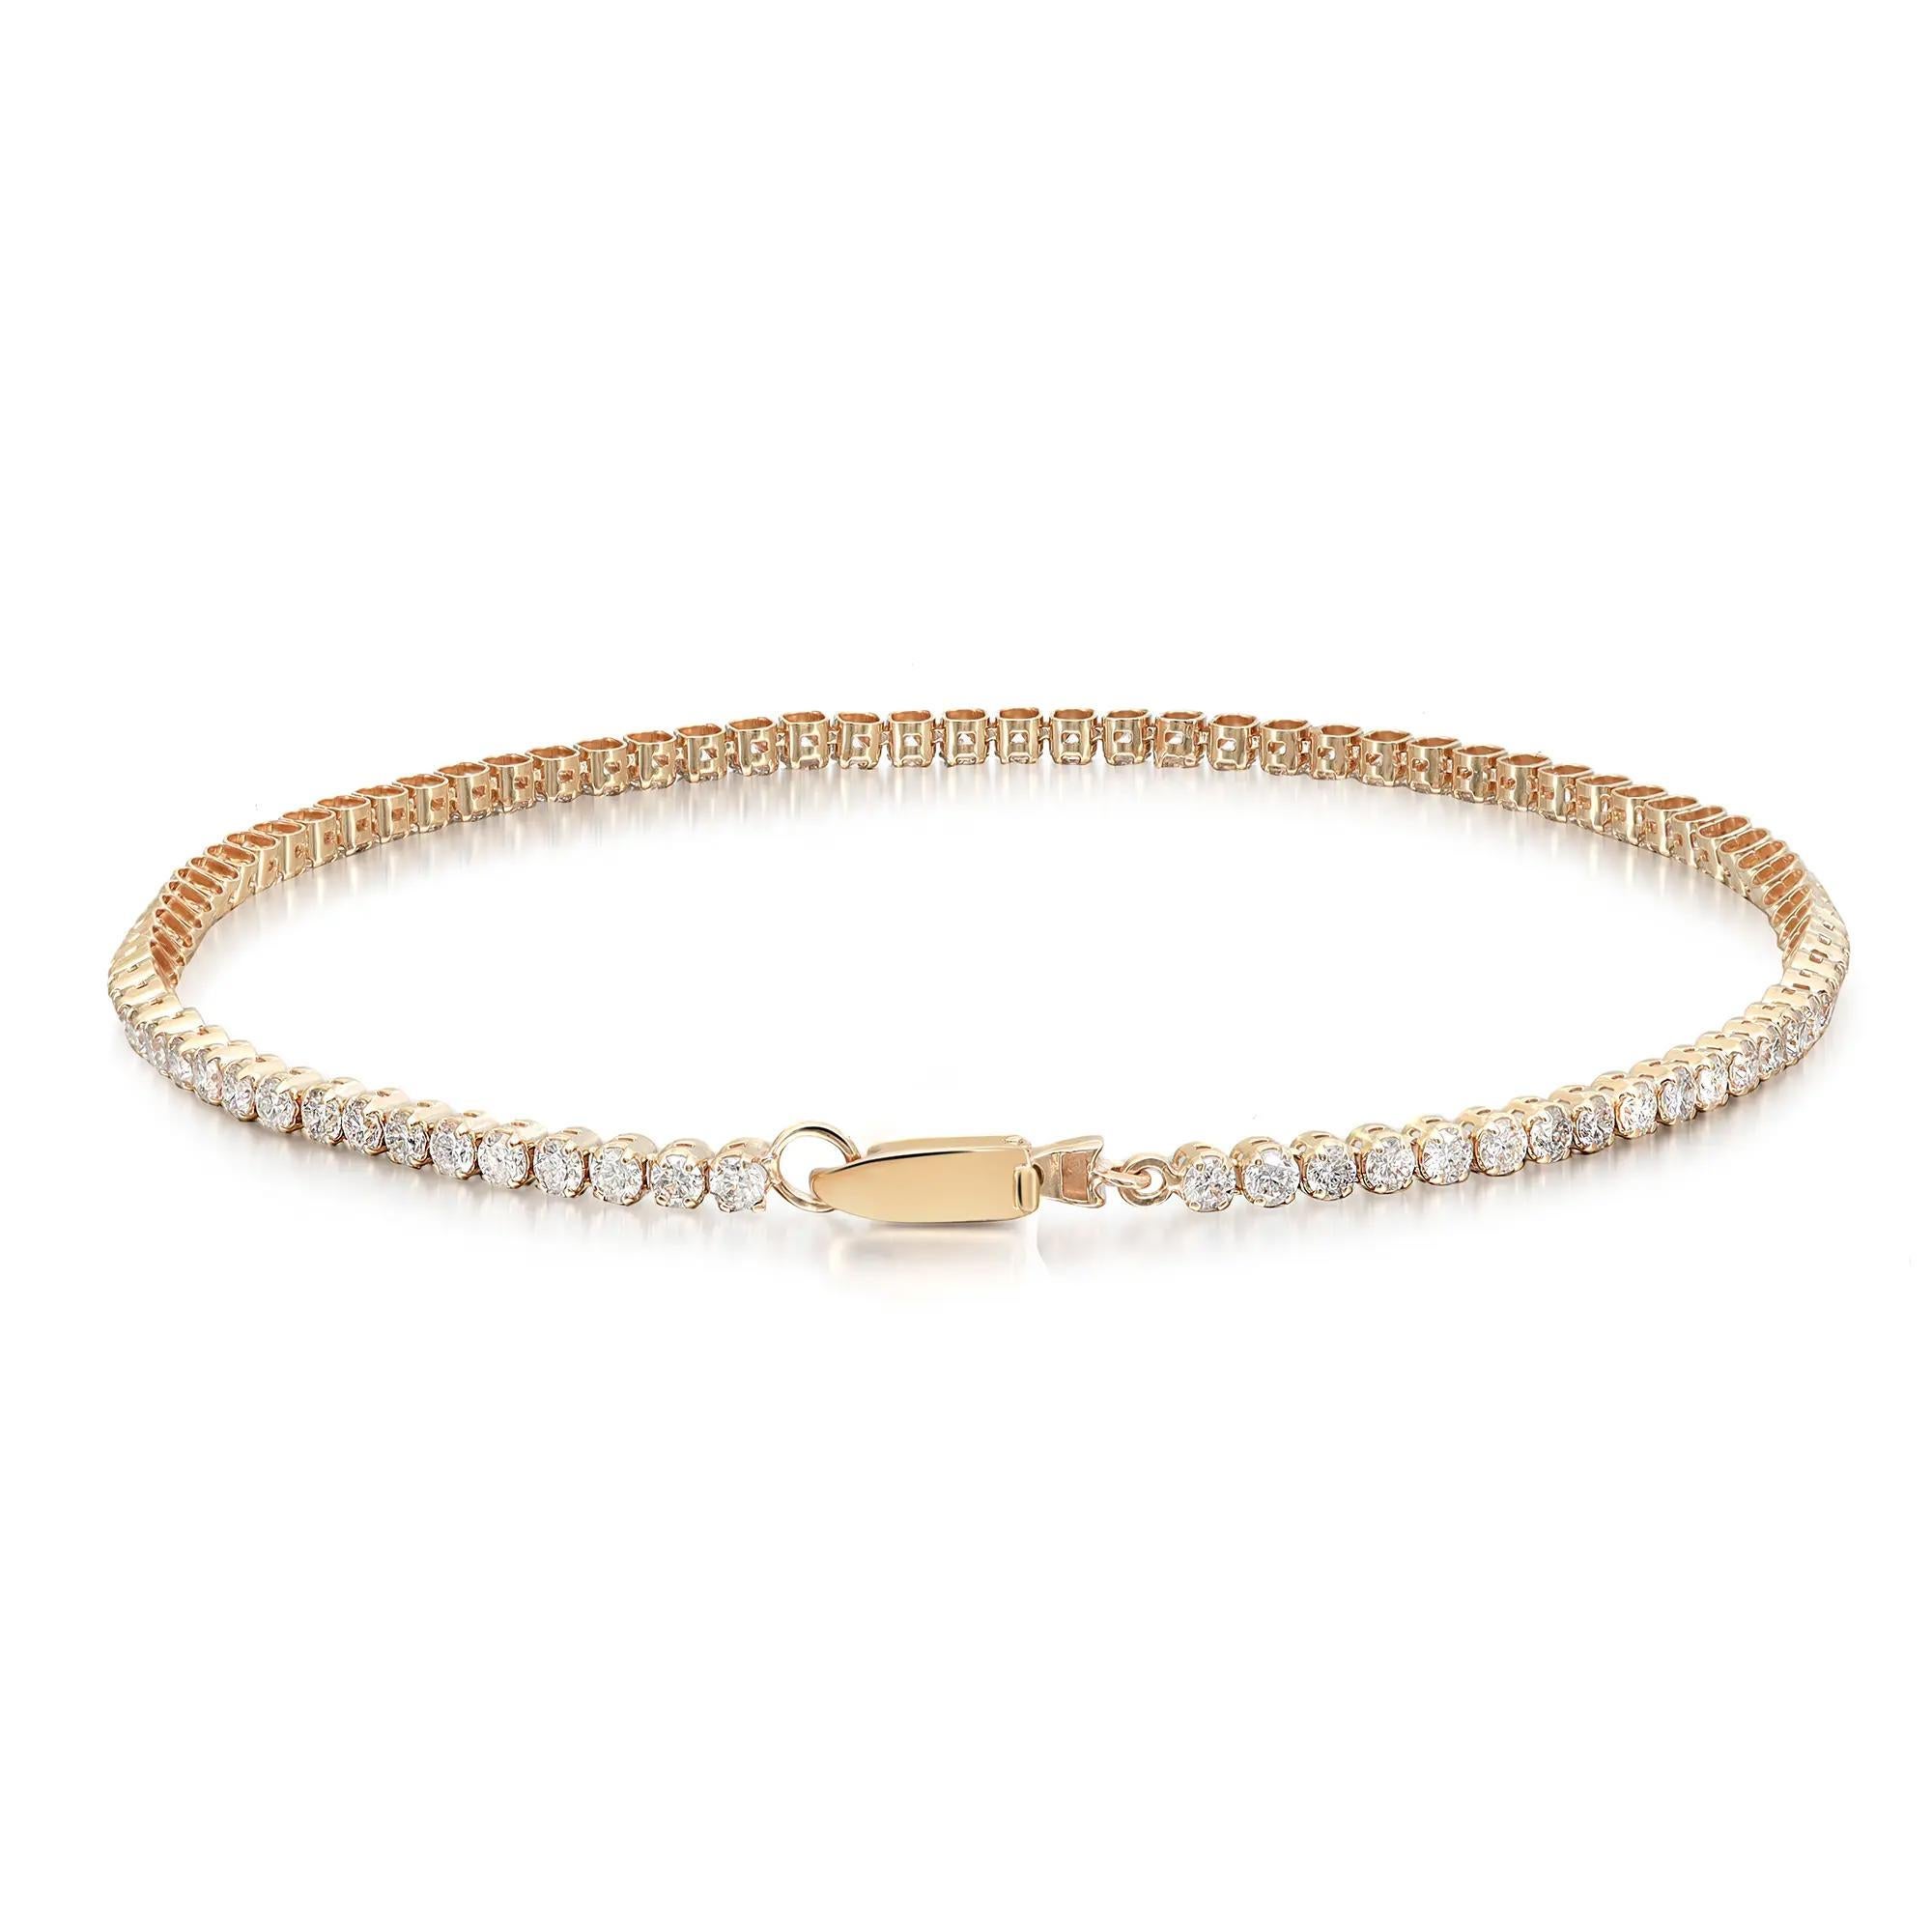 Add a touch of sparkle to your wrist with this beautiful and shimmering prong set round brilliant cut diamond tennis bracelet. Crafted in 14K yellow gold. Super stackable and easy to wear. Total diamond weight: 1.98 carats. Diamond color G-H and